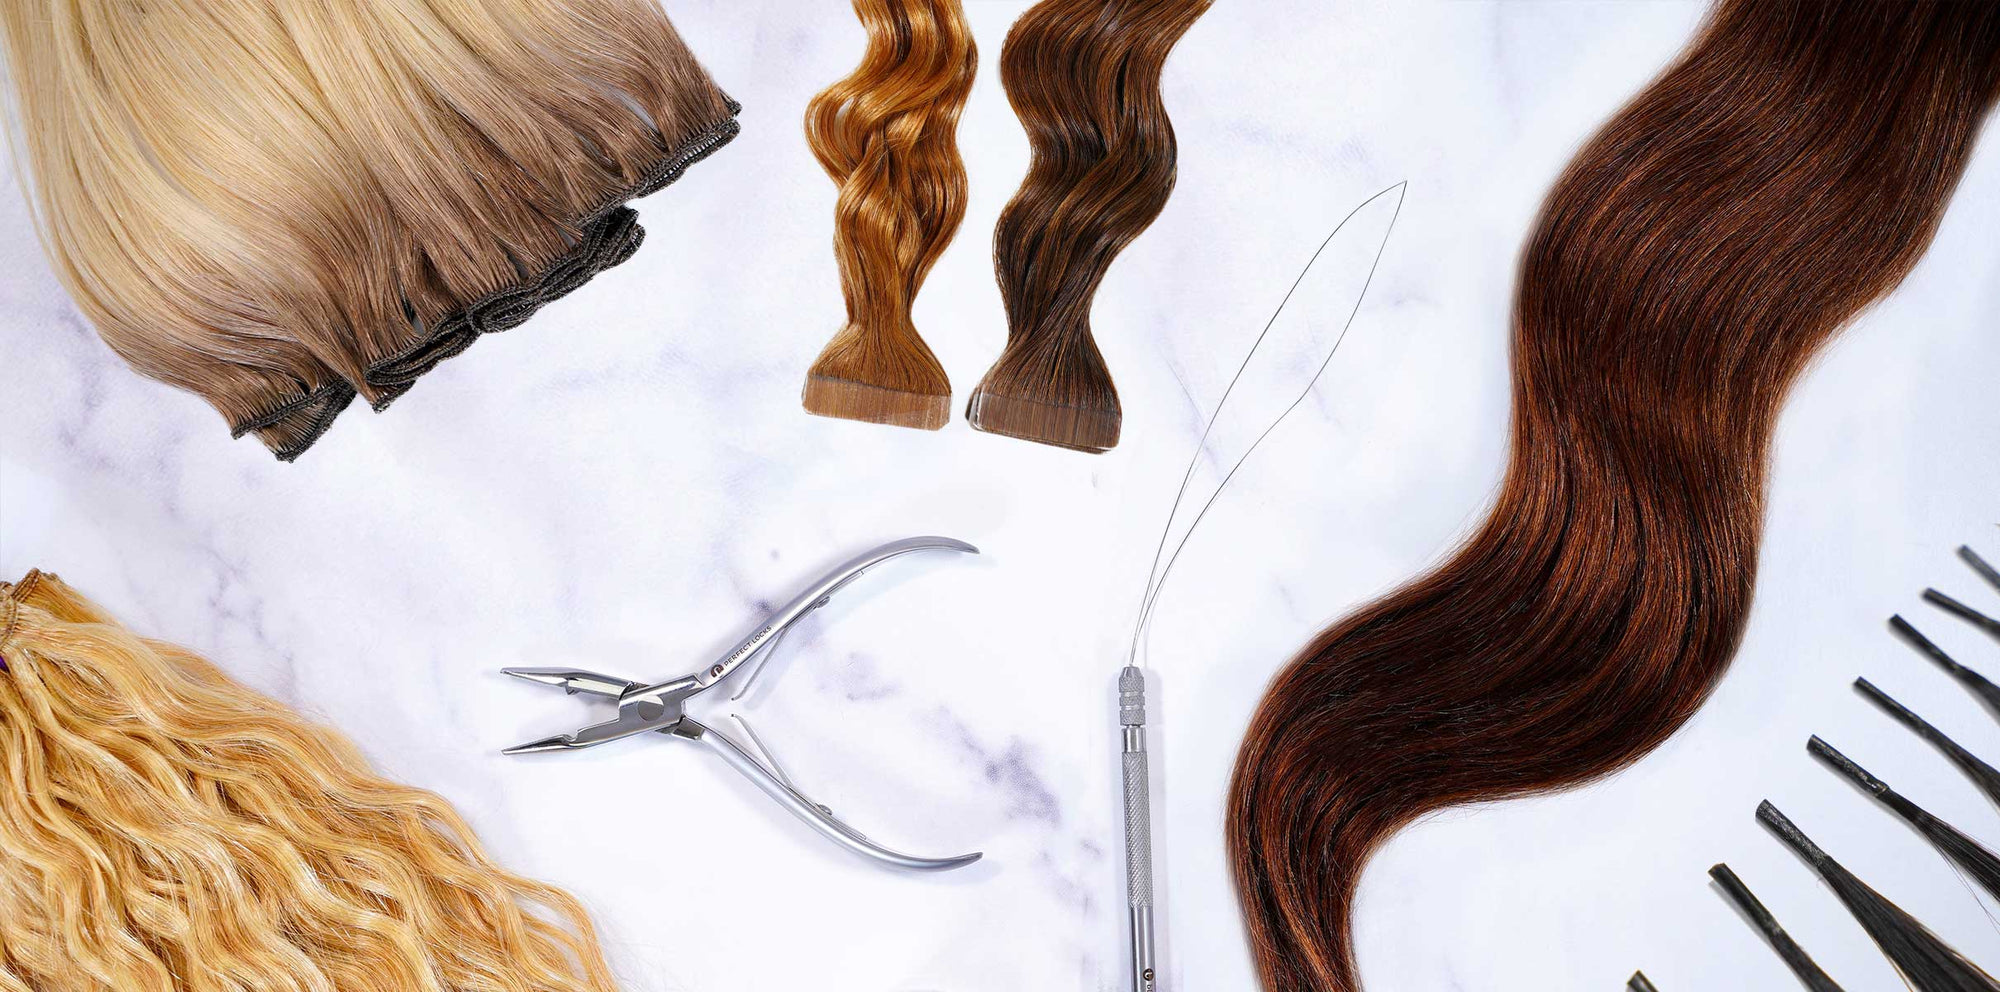 Different types of hair extensions and tools